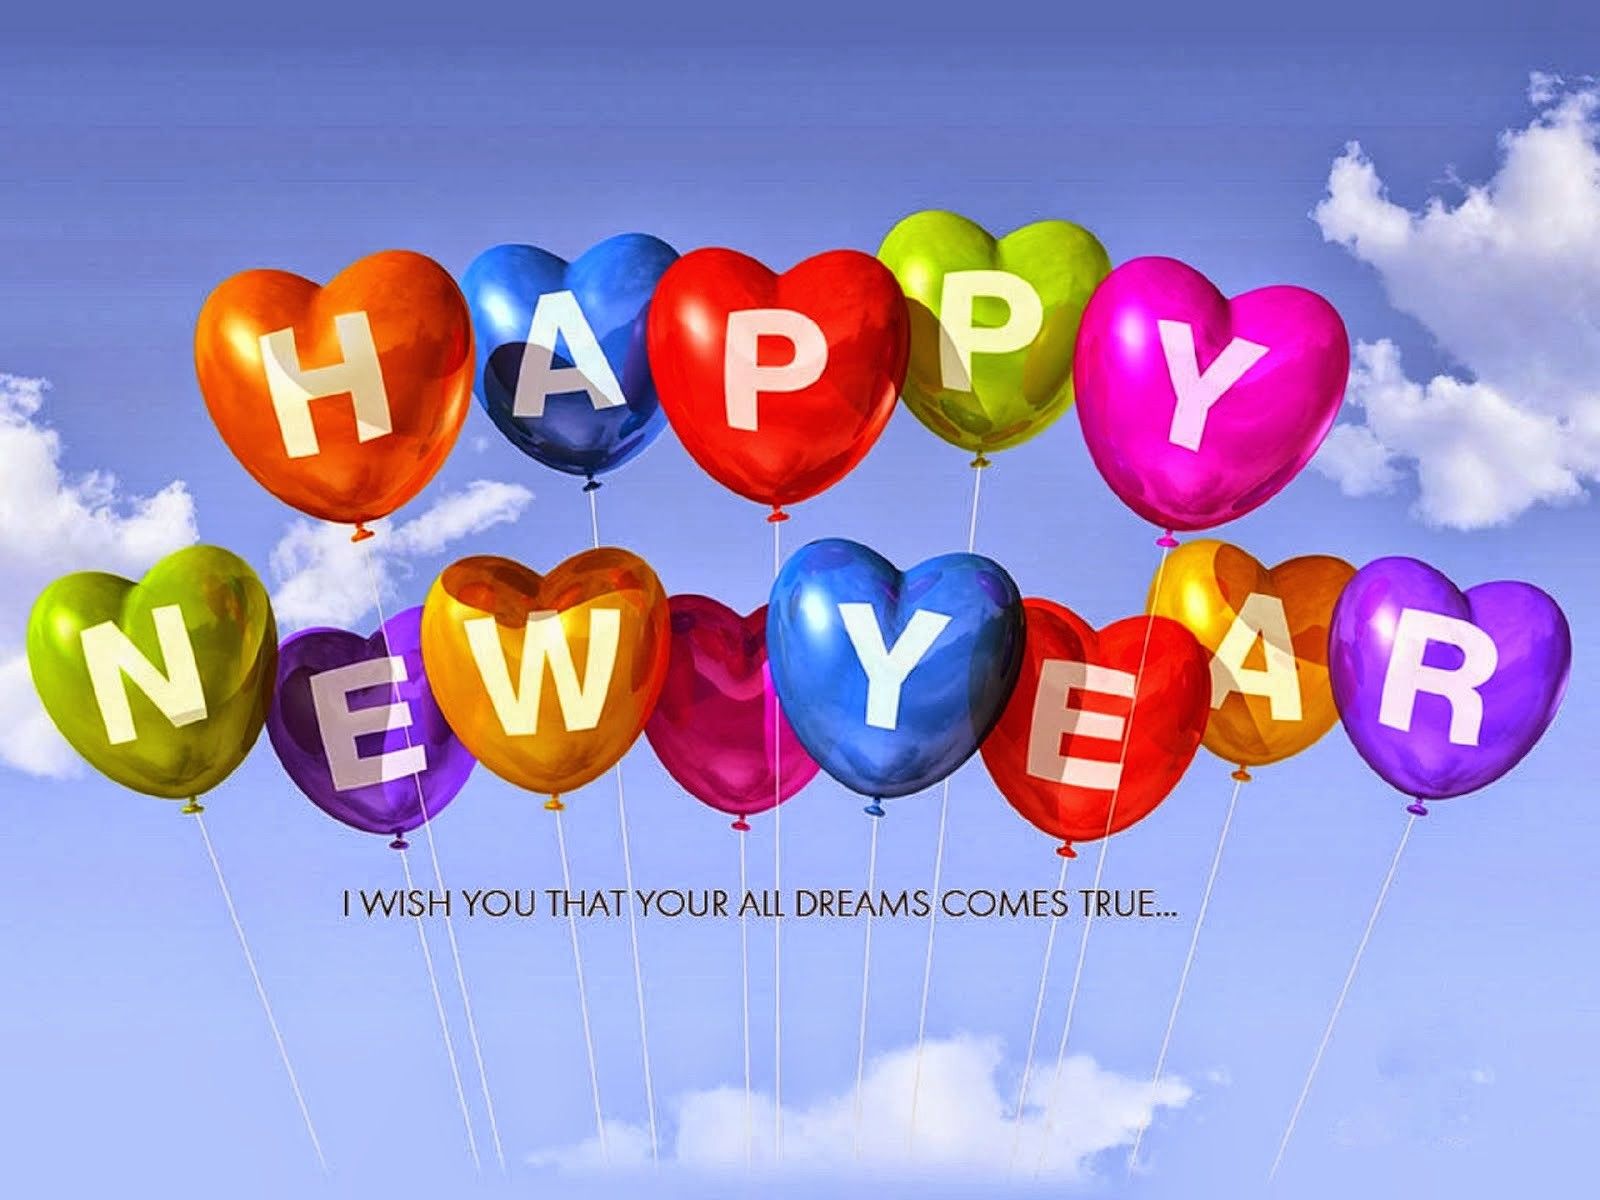 Happy, New, Year, Wallpaper, Full, Screen, High, Resolution, Download, Picture, Full, Free, Download, Free, Abstract, 1600x1200